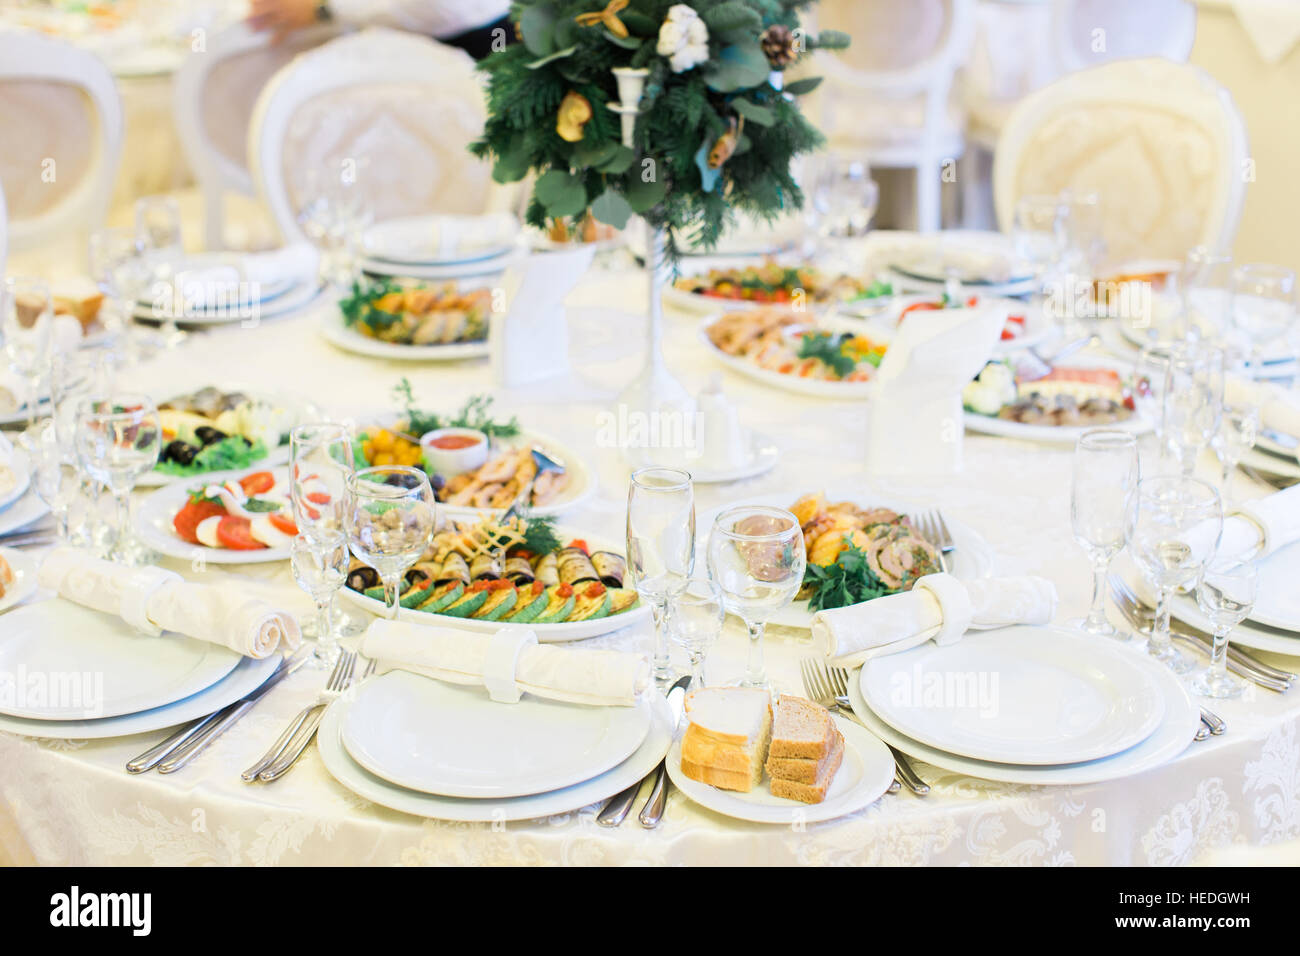 Banquet wedding table setting on evening reception Stock Photo